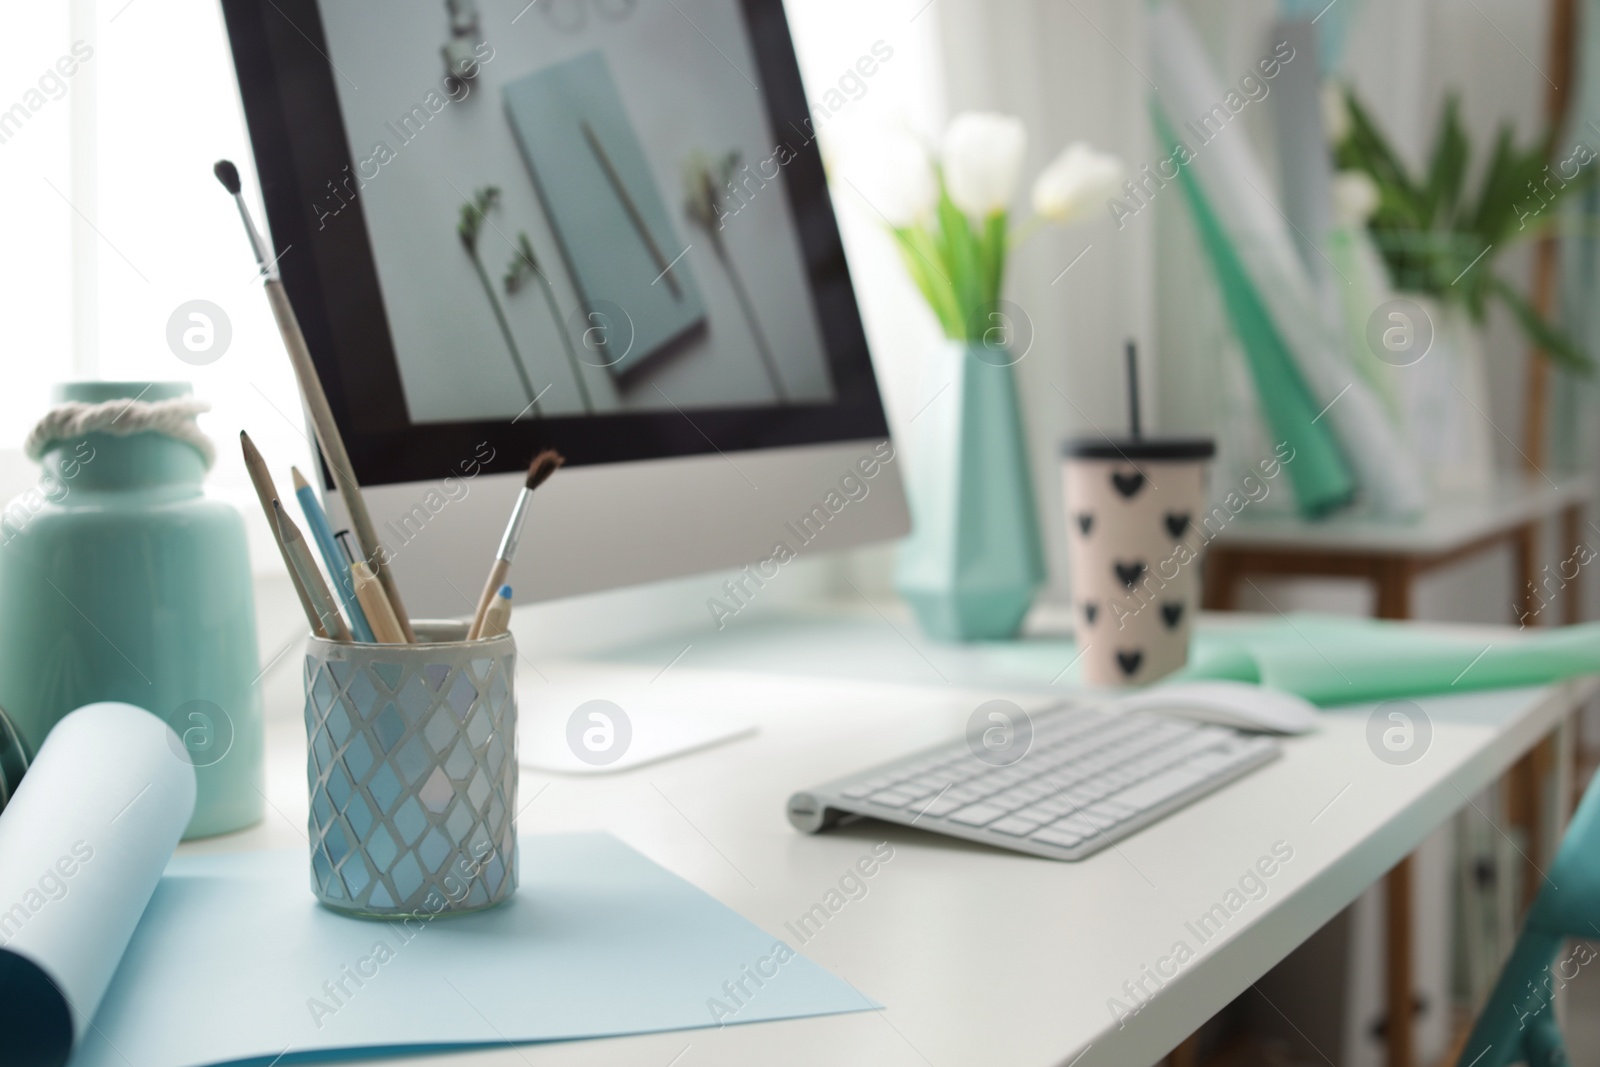 Photo of Stylish workplace with modern computer on desk. Focus on pencil holder